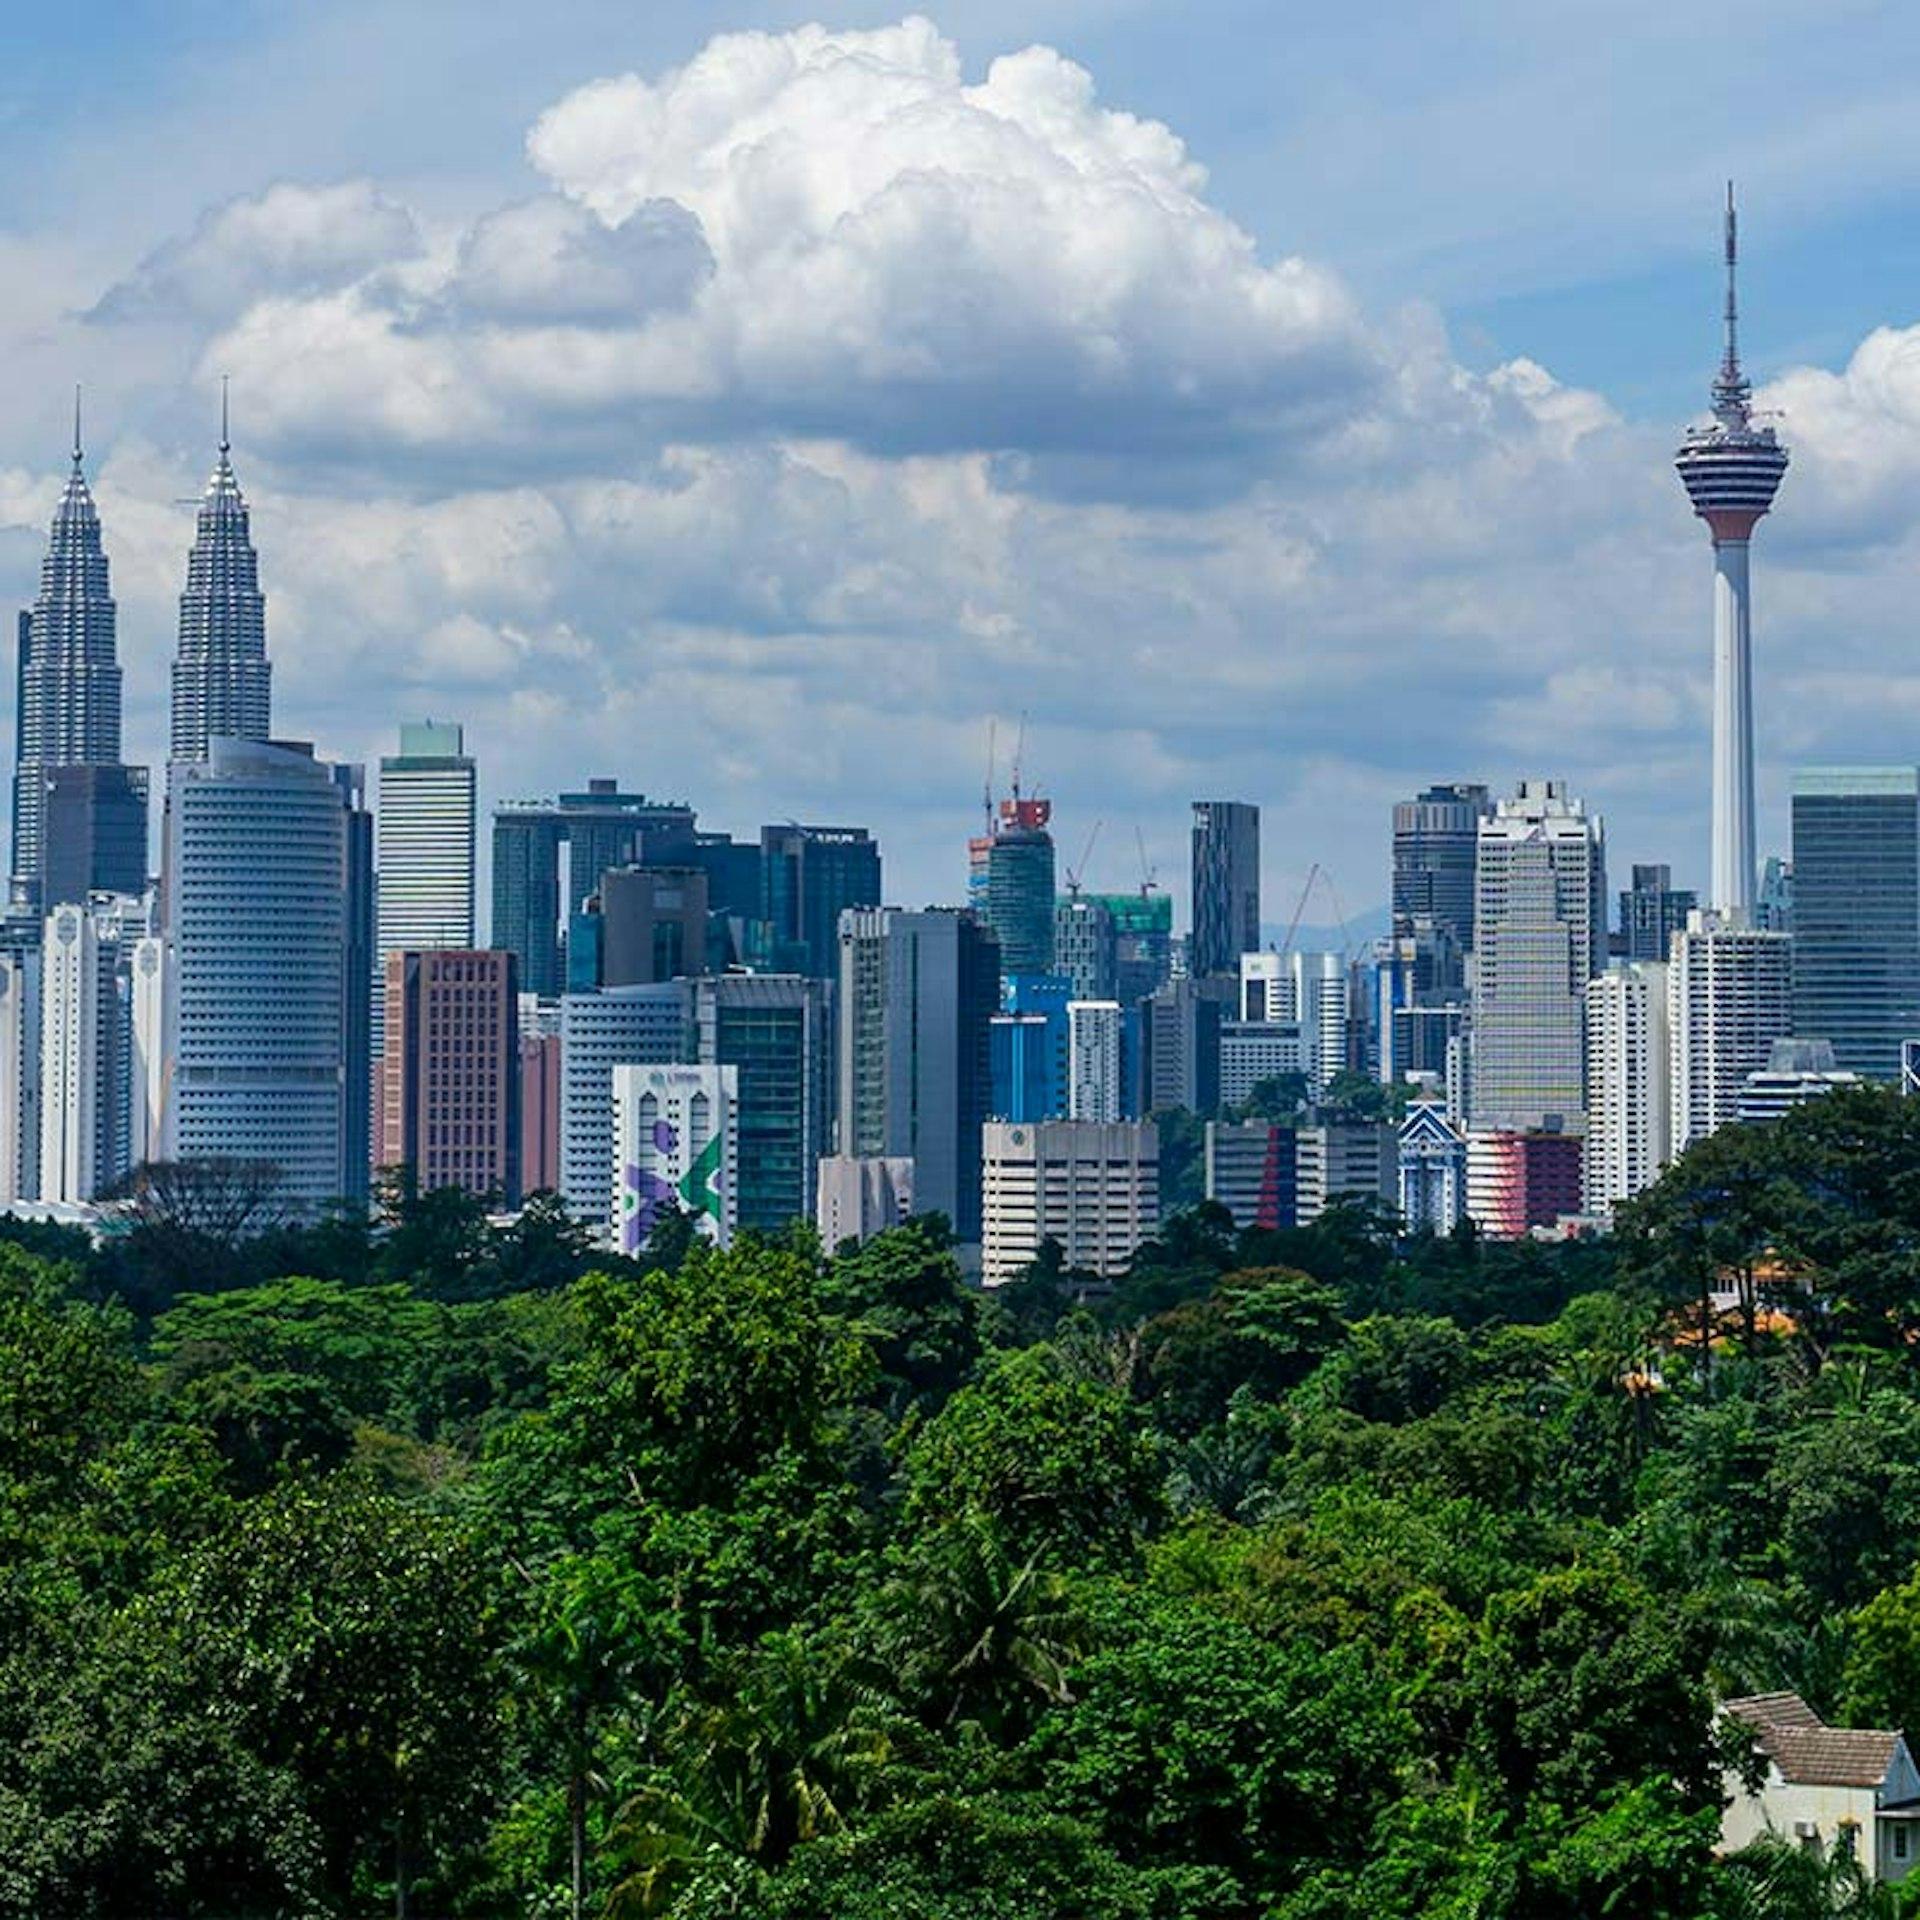 Get the latest news and updates on e-invoicing, e-ordering, e-archiving and indirect tax regulatory requirements for Malaysia.